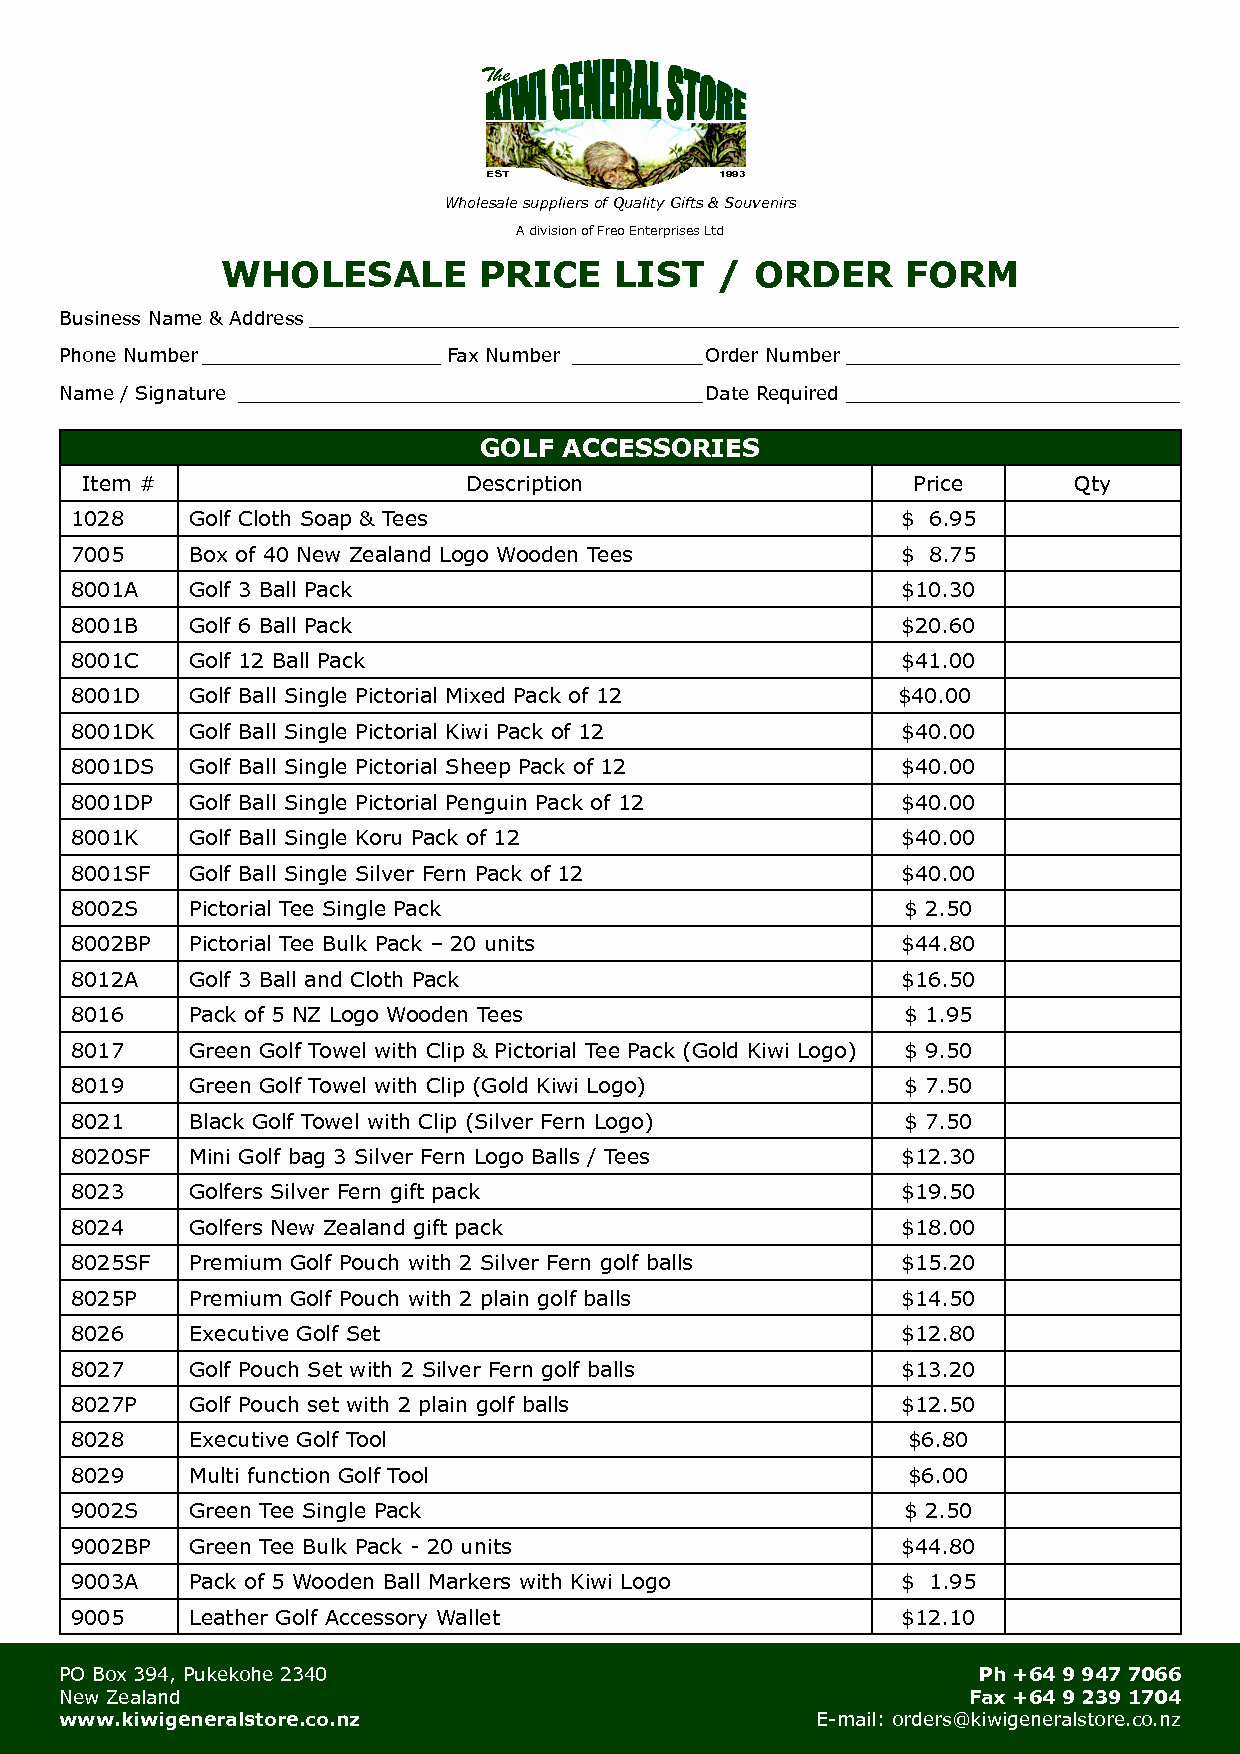 Wholesale Price Sheet Template Luxury Best S Of Product order form Template wholesale